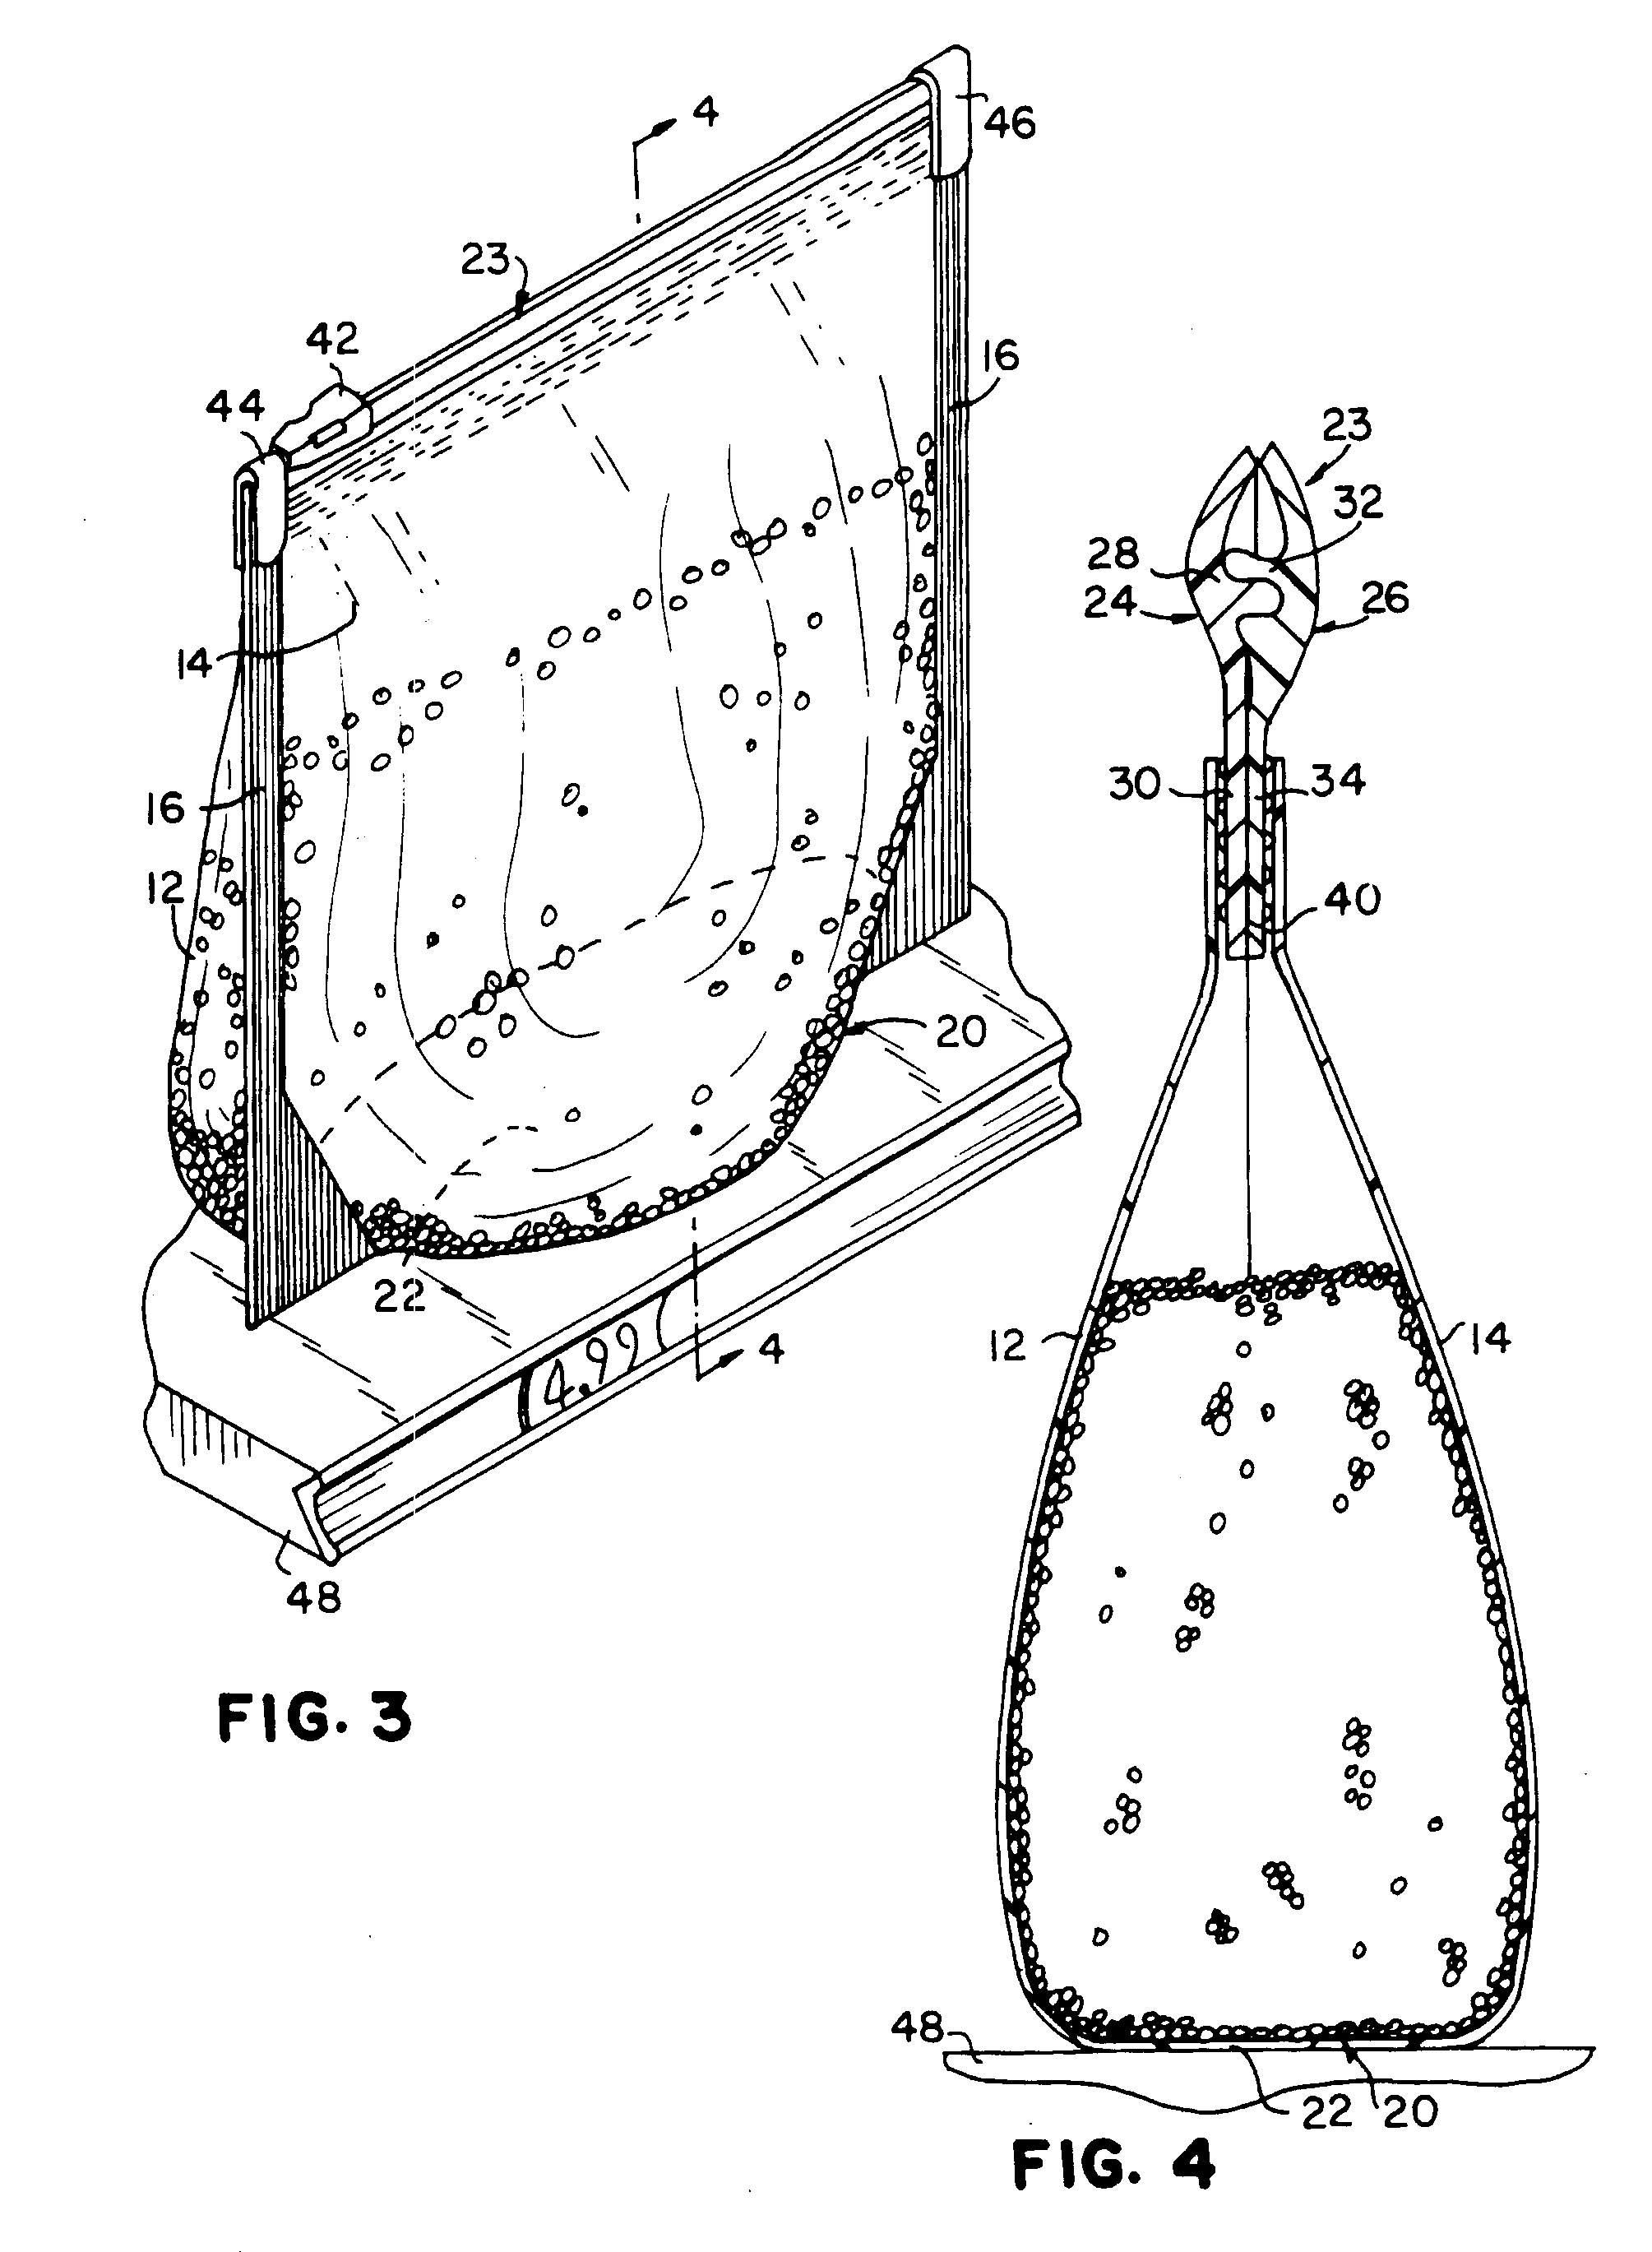 Fill-through-the-top package and method and apparatus for making the same